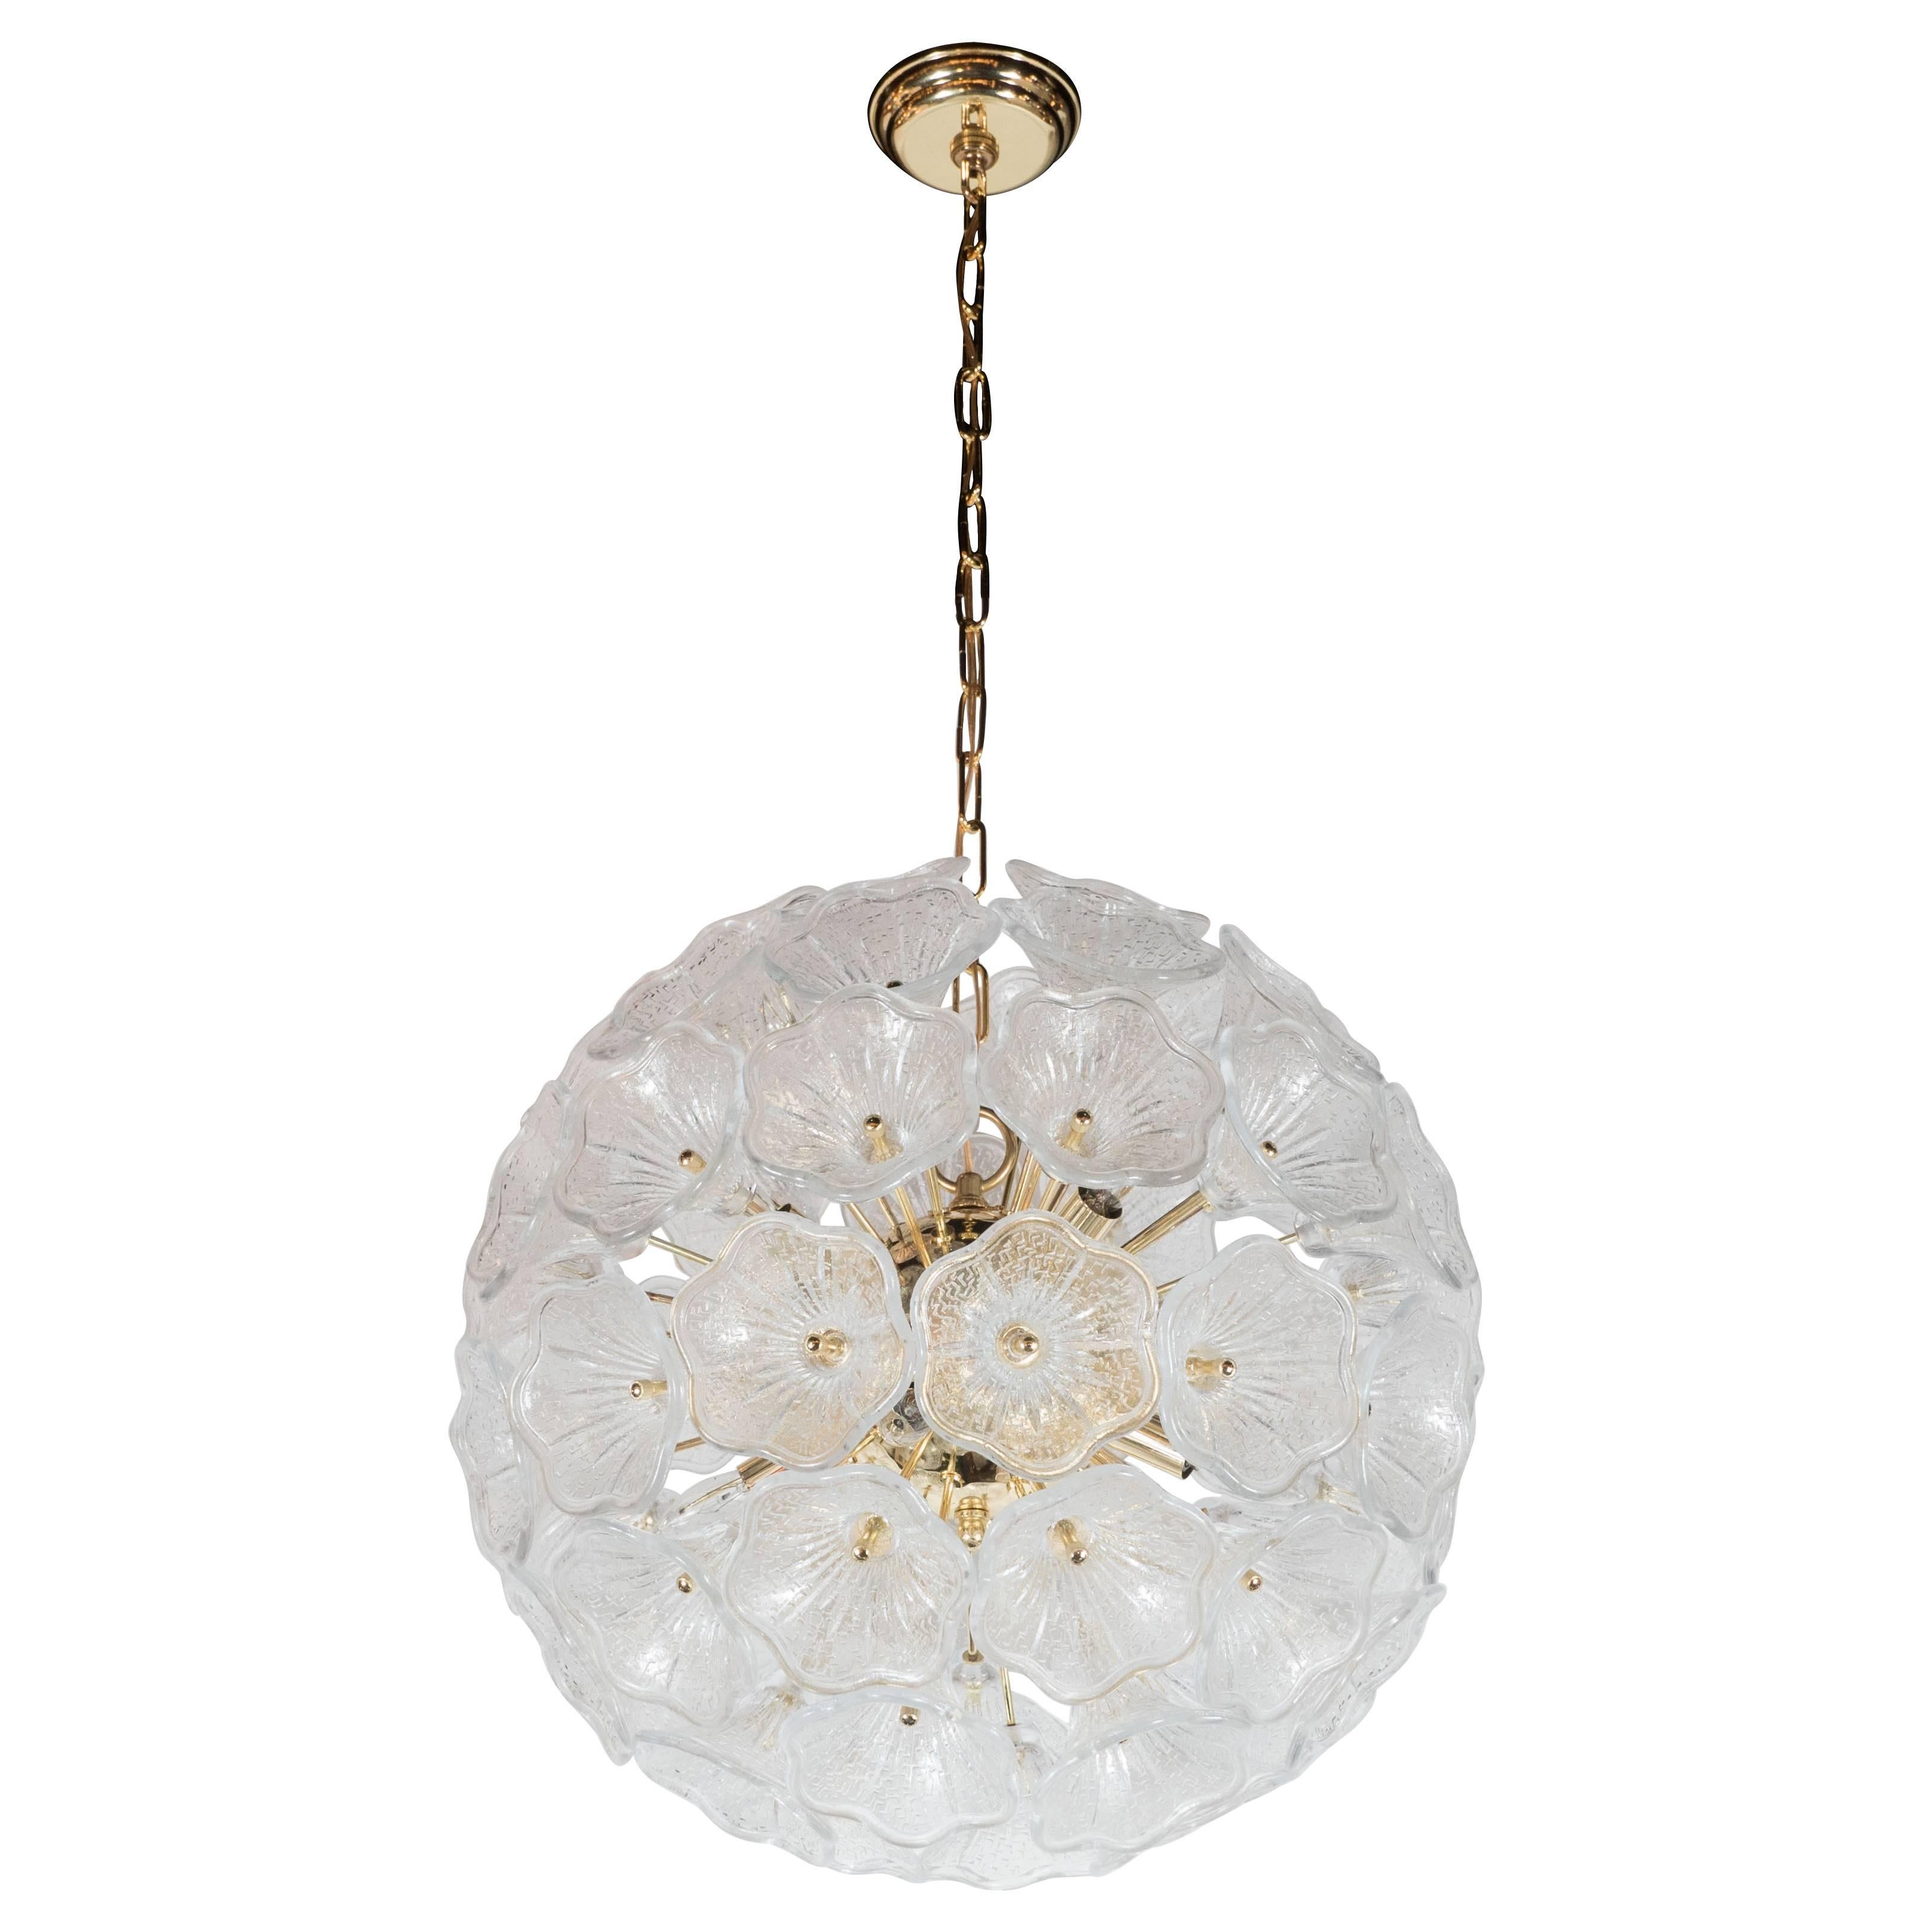 Handblown Murano Textured Glass Floral Chandelier with Polished Brass Frame